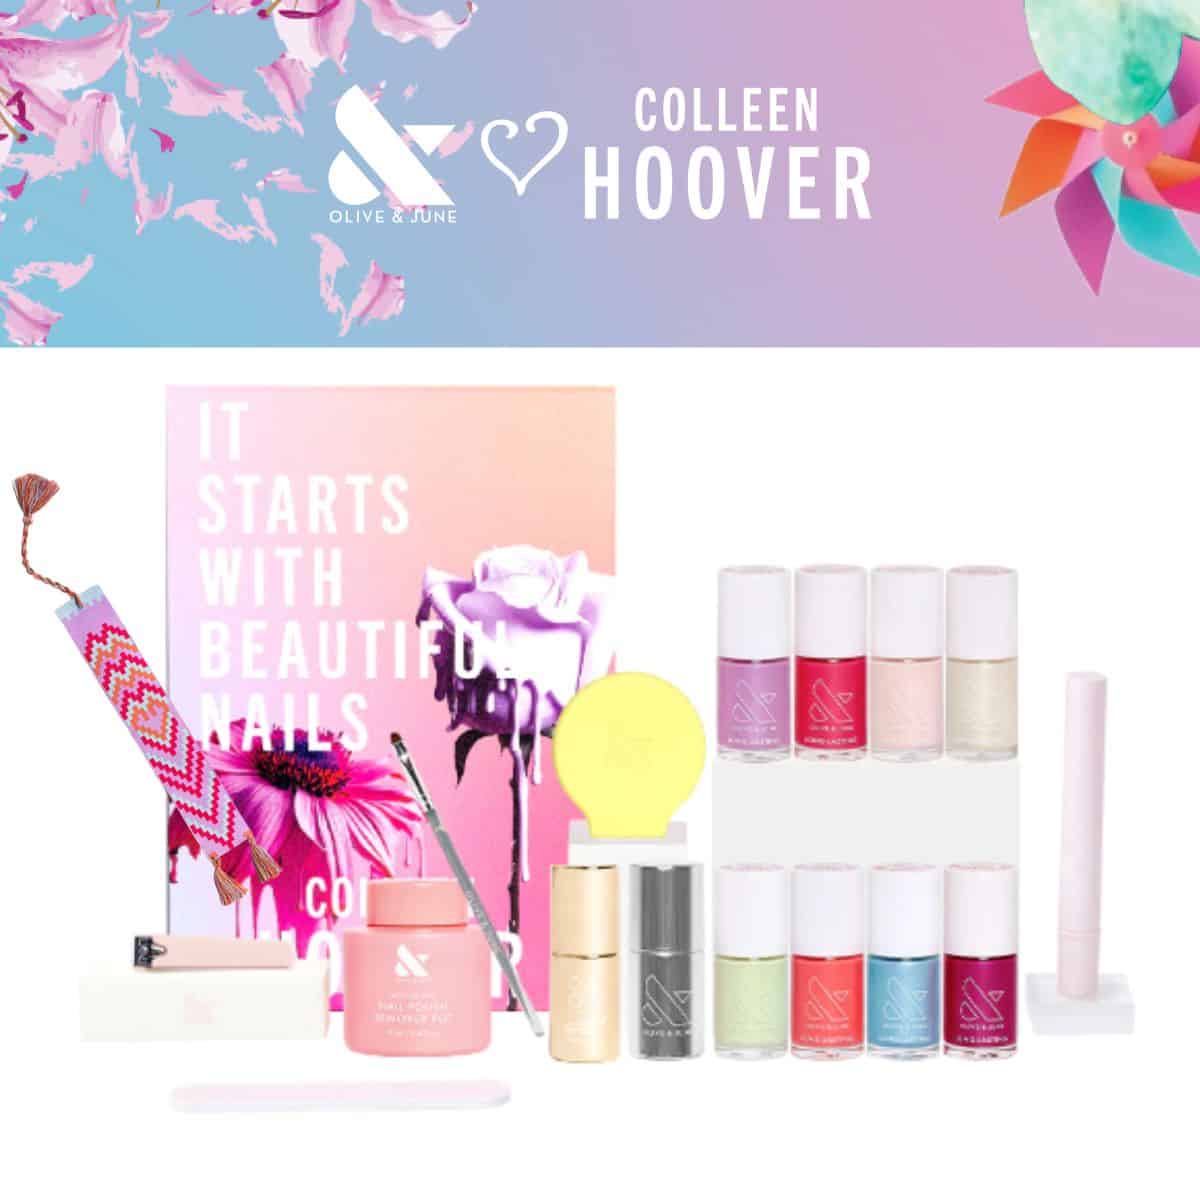 olive and june x colleen hoover collaboration: mani system with nail polishes.